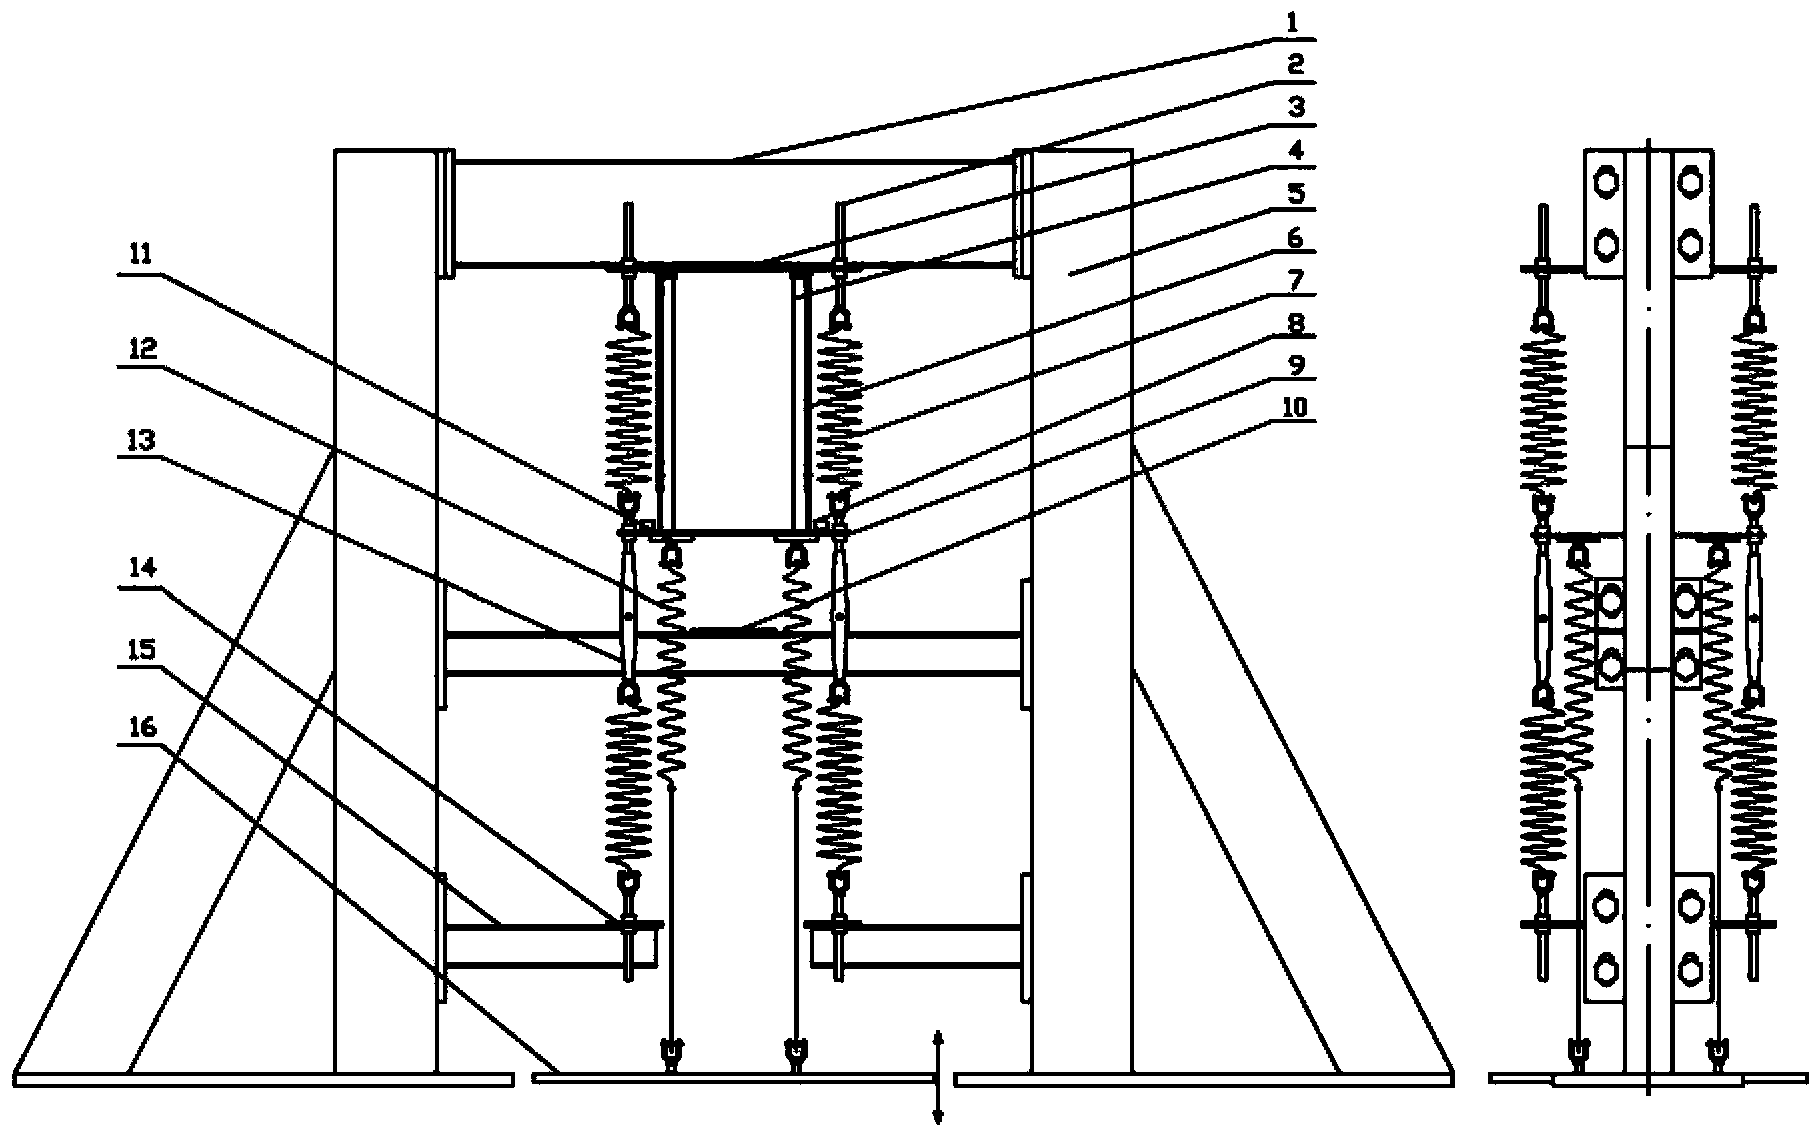 Force control loading and layout variable vertical vibration experimental device